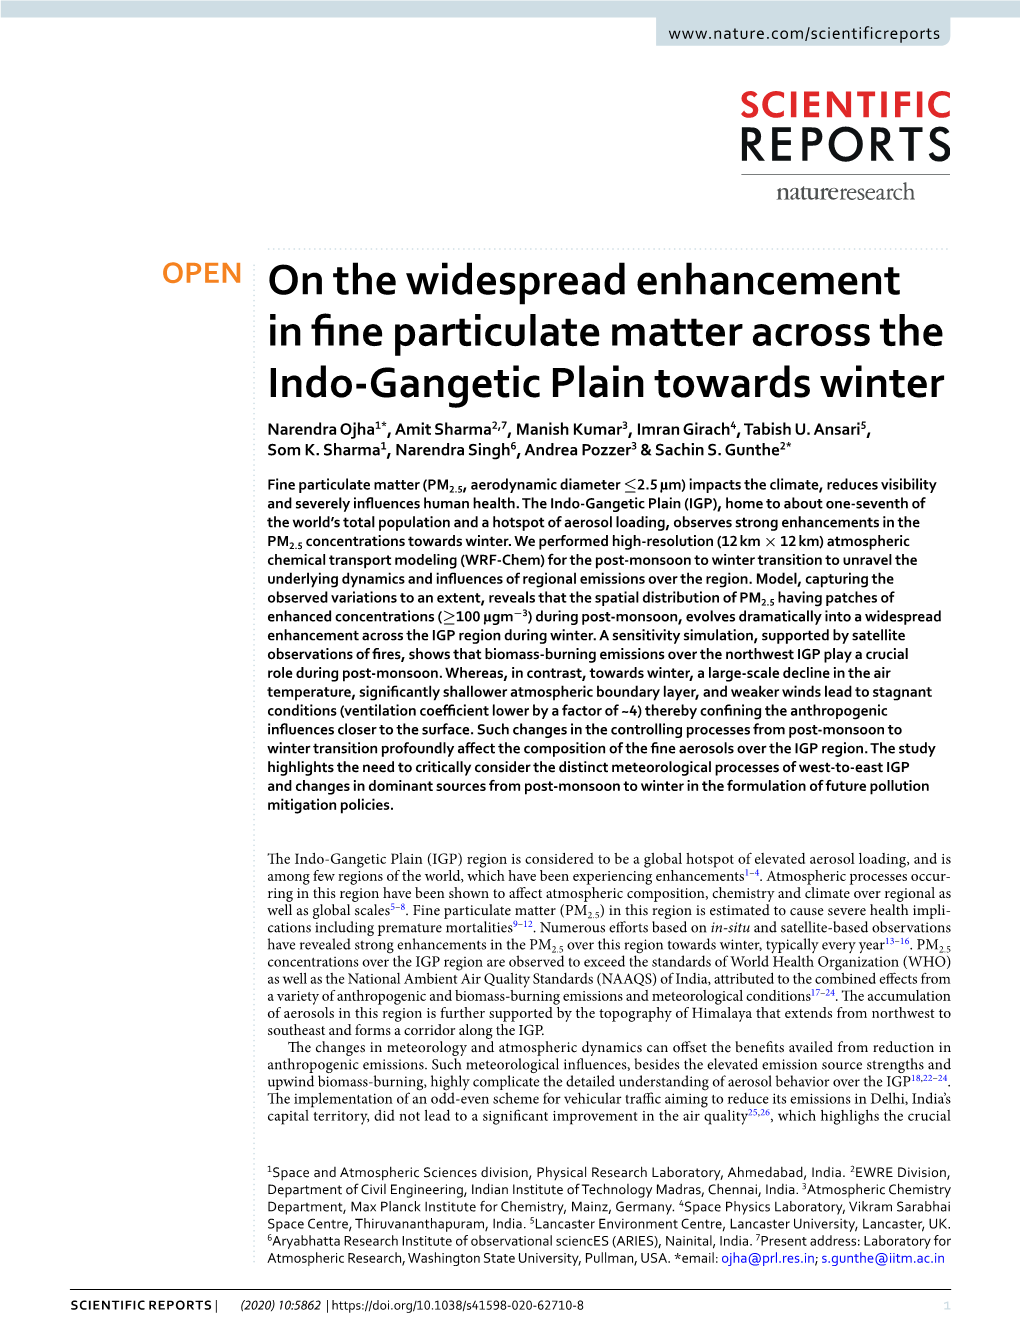 On the Widespread Enhancement in Fine Particulate Matter Across The